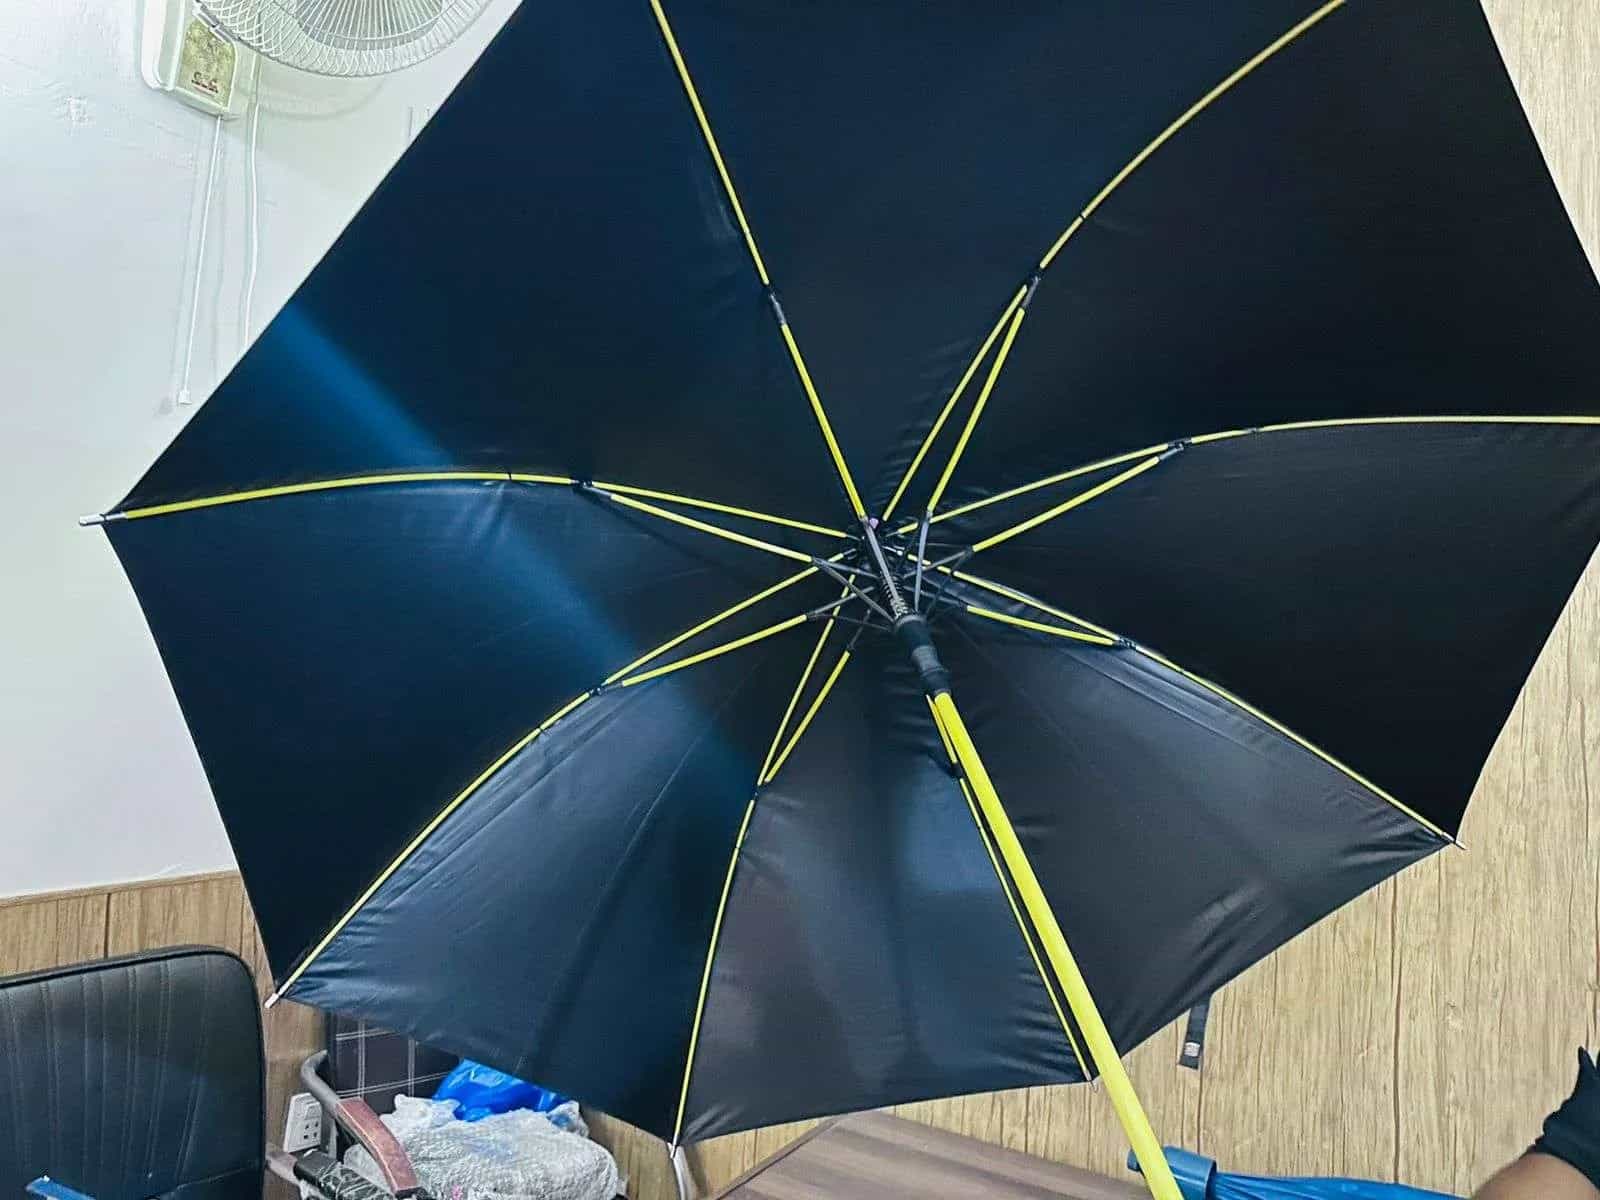 4 Person large Size Automatic Folding Umbrella with LED Flashlight, Sunny and Rainy umbrella, Business Umbrella, Anti Wet Car Umbrella, Night Umbrella, Waterproof, Sun Proof and Wind Resistant